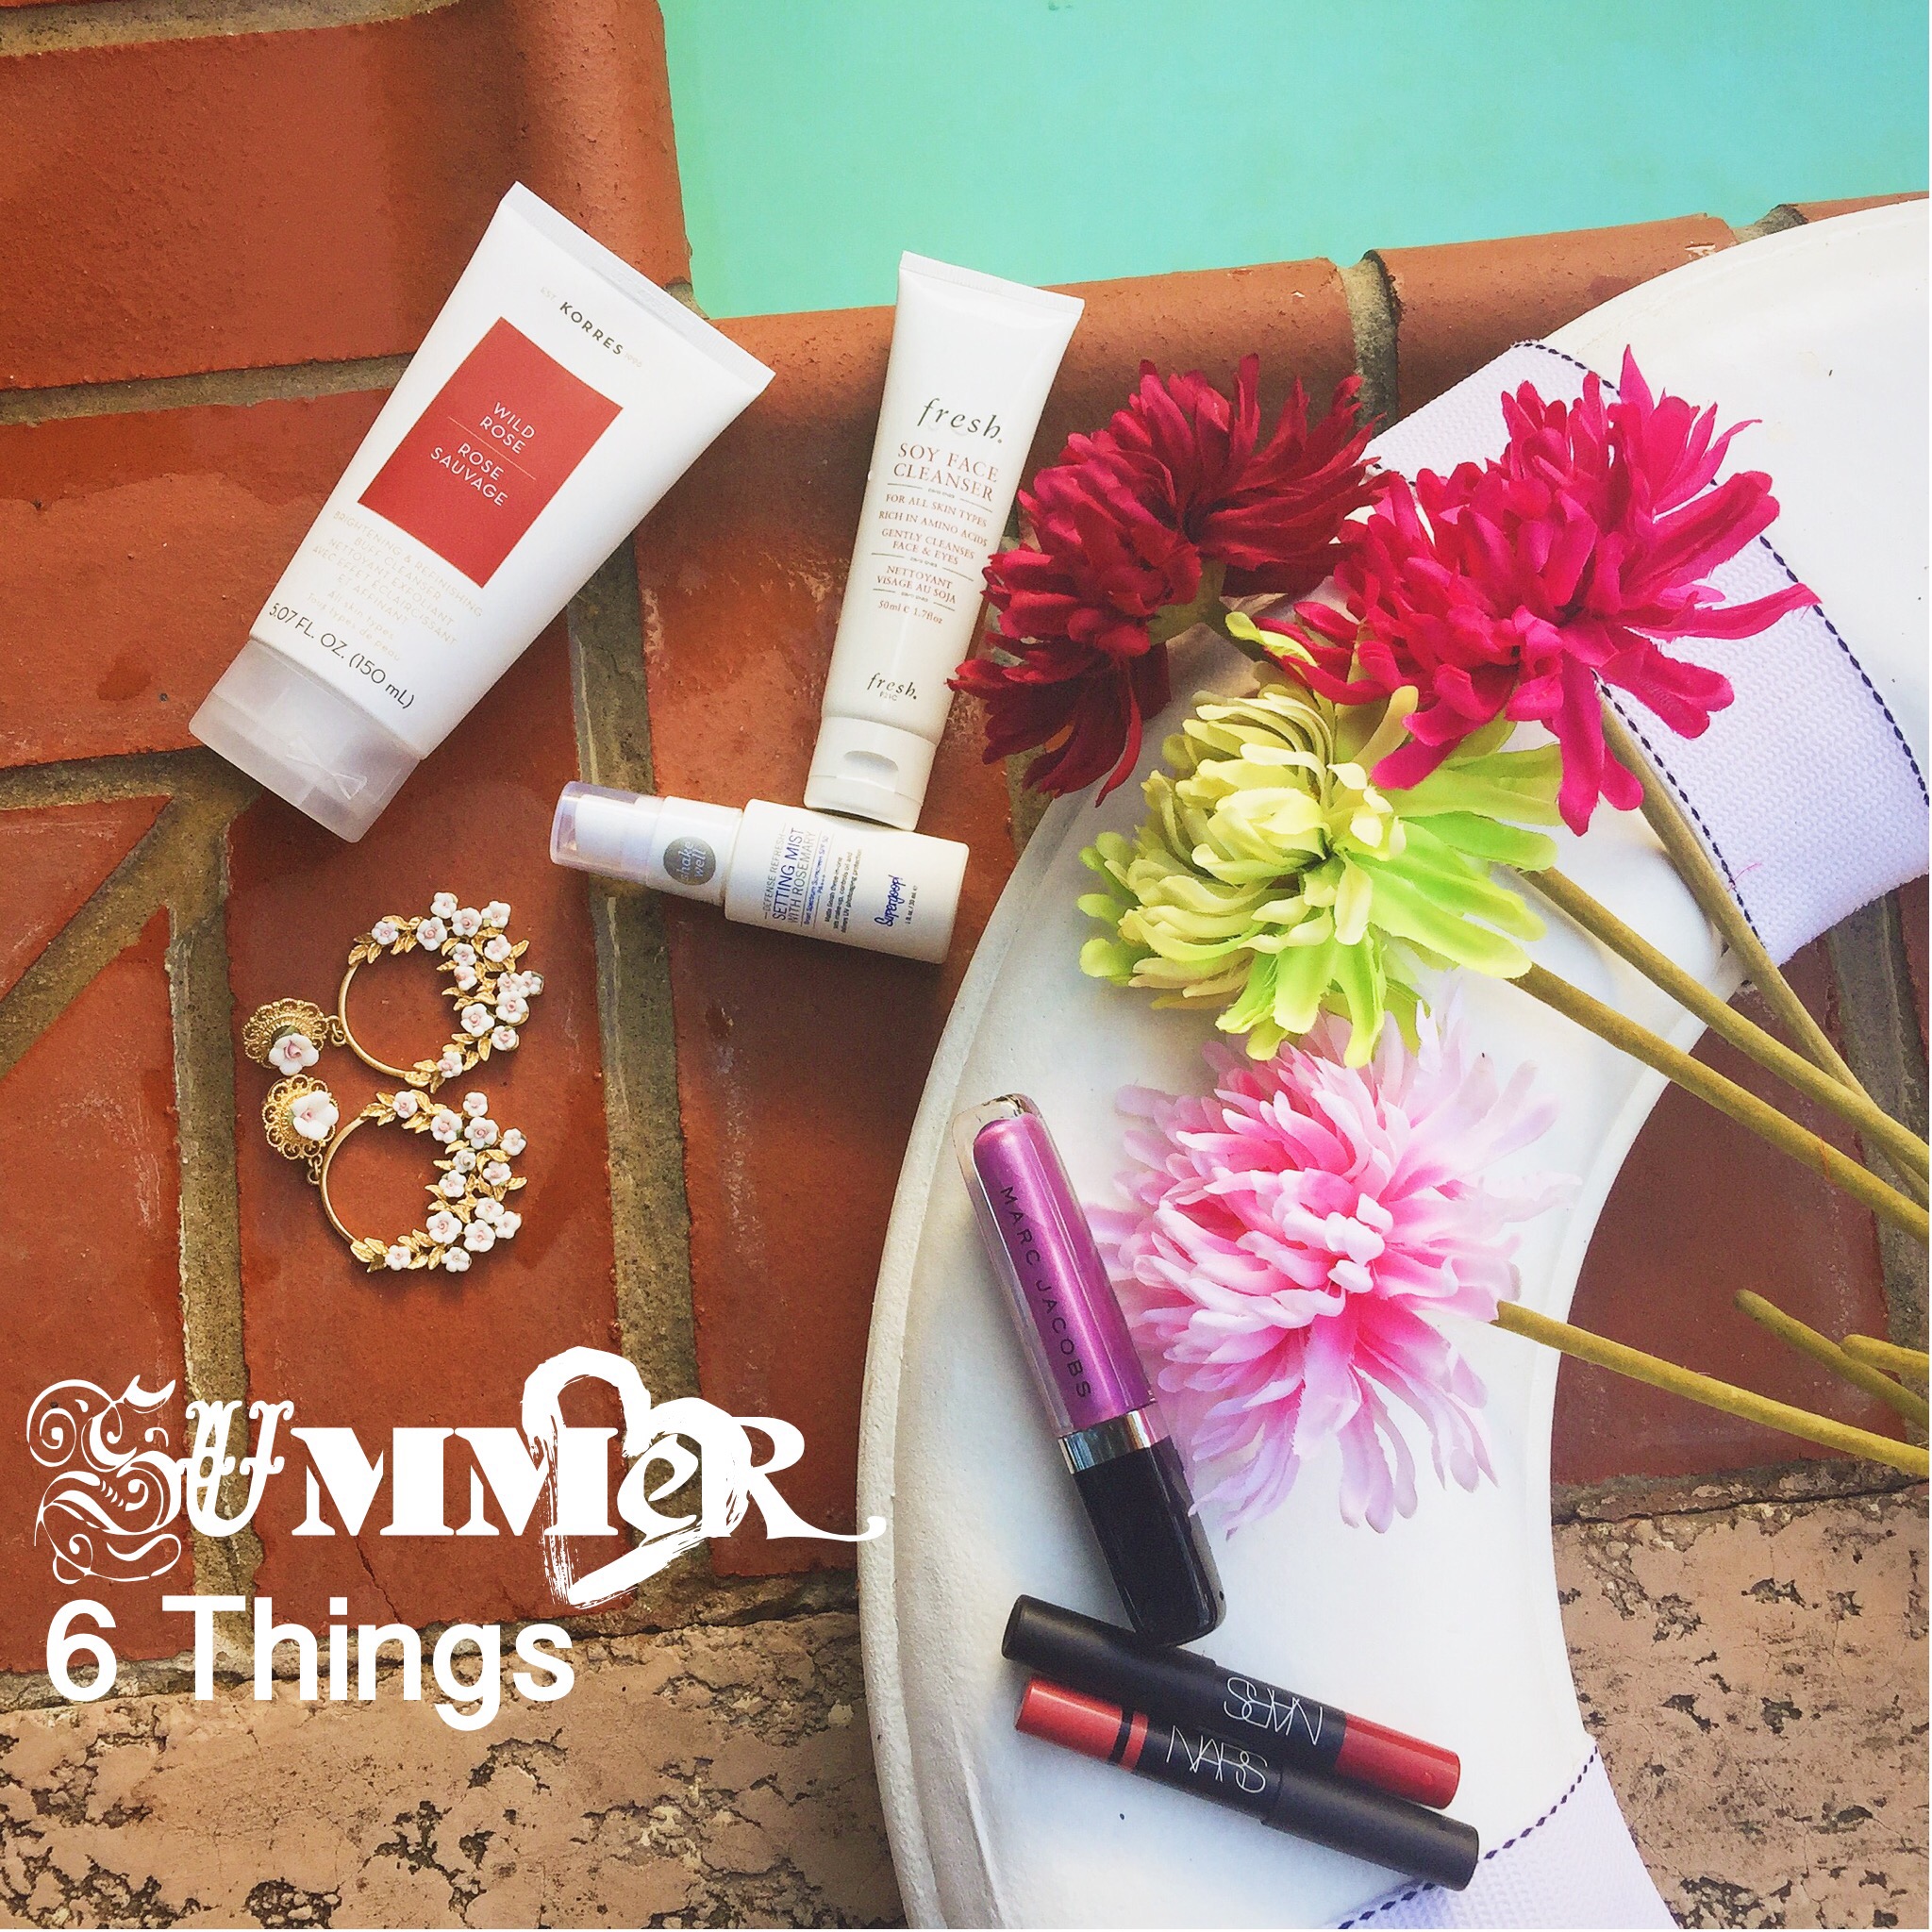 Beauty products and tips for spring and summer featuring korres rose cleanser, fresh soy cleanser, aldo flower earrings, supergoop spf setting mist, nars red lipstick cruella, marc jacobs beauty lip gloss